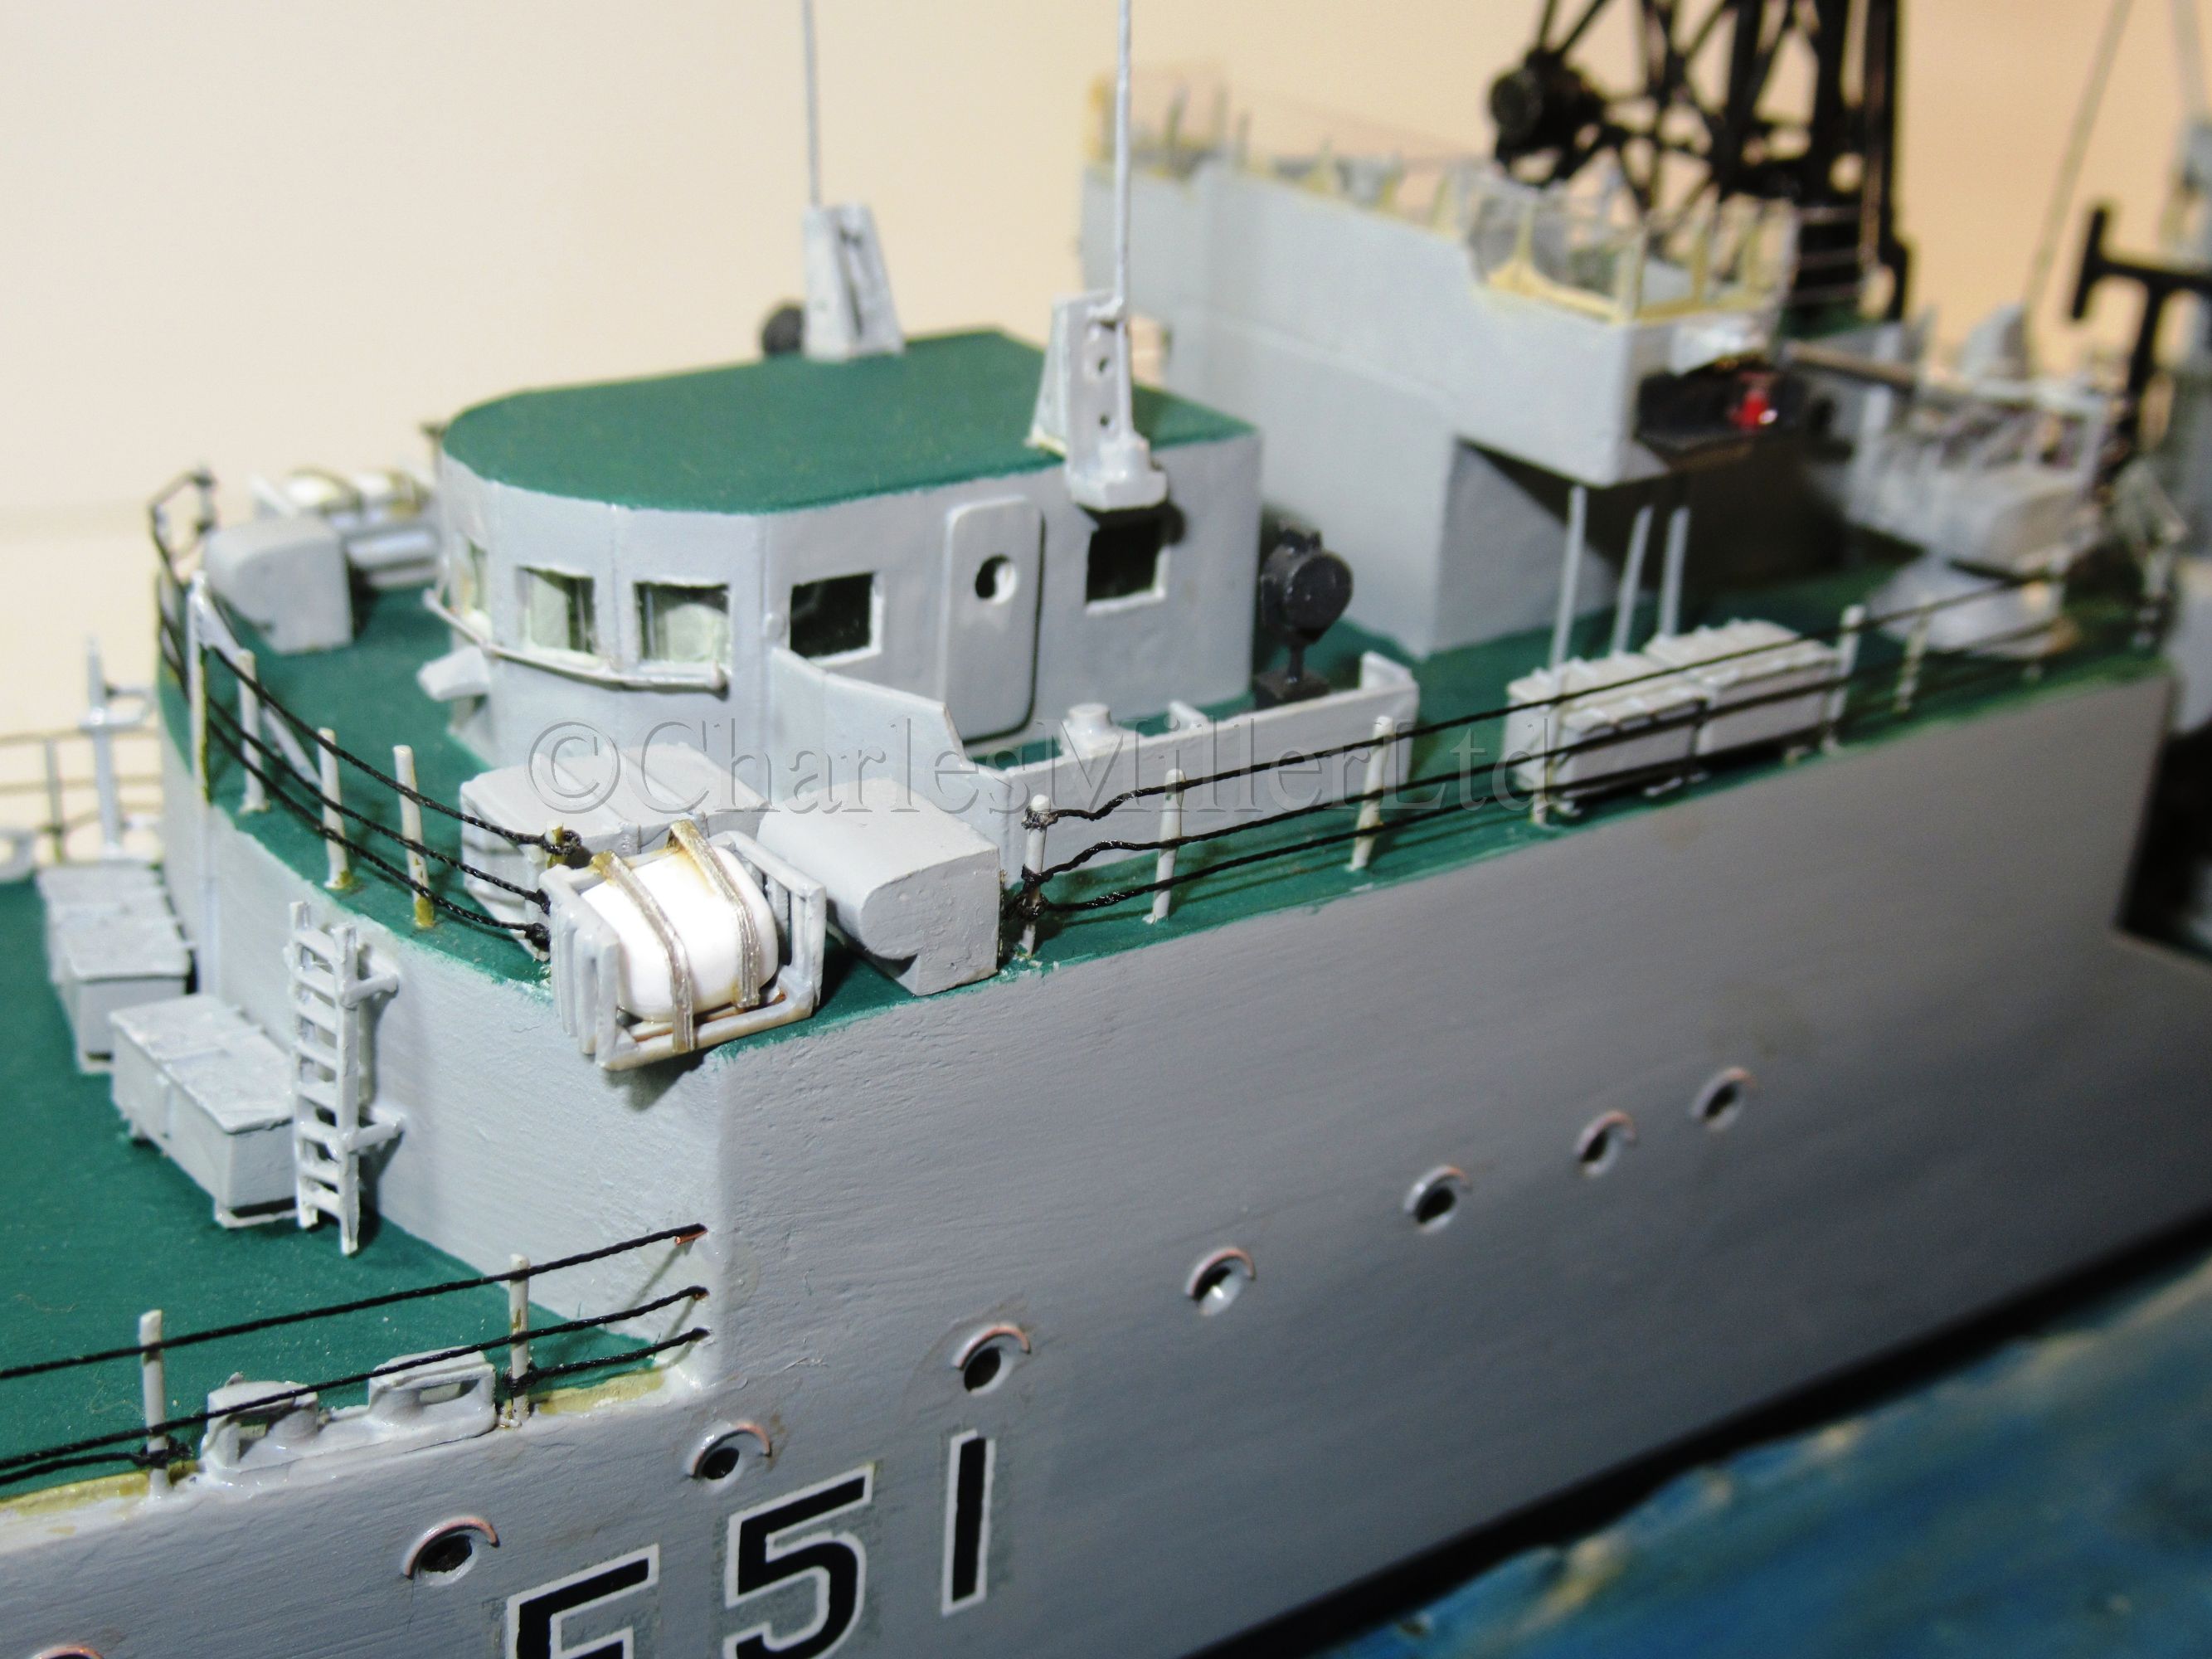 A 1:192 WATERLINE MODEL FOR THE TYPE 14 BLACKWOOD CLASS FRIGATE HMS GRAFTON (F51), AS FITTED IN - Image 9 of 14